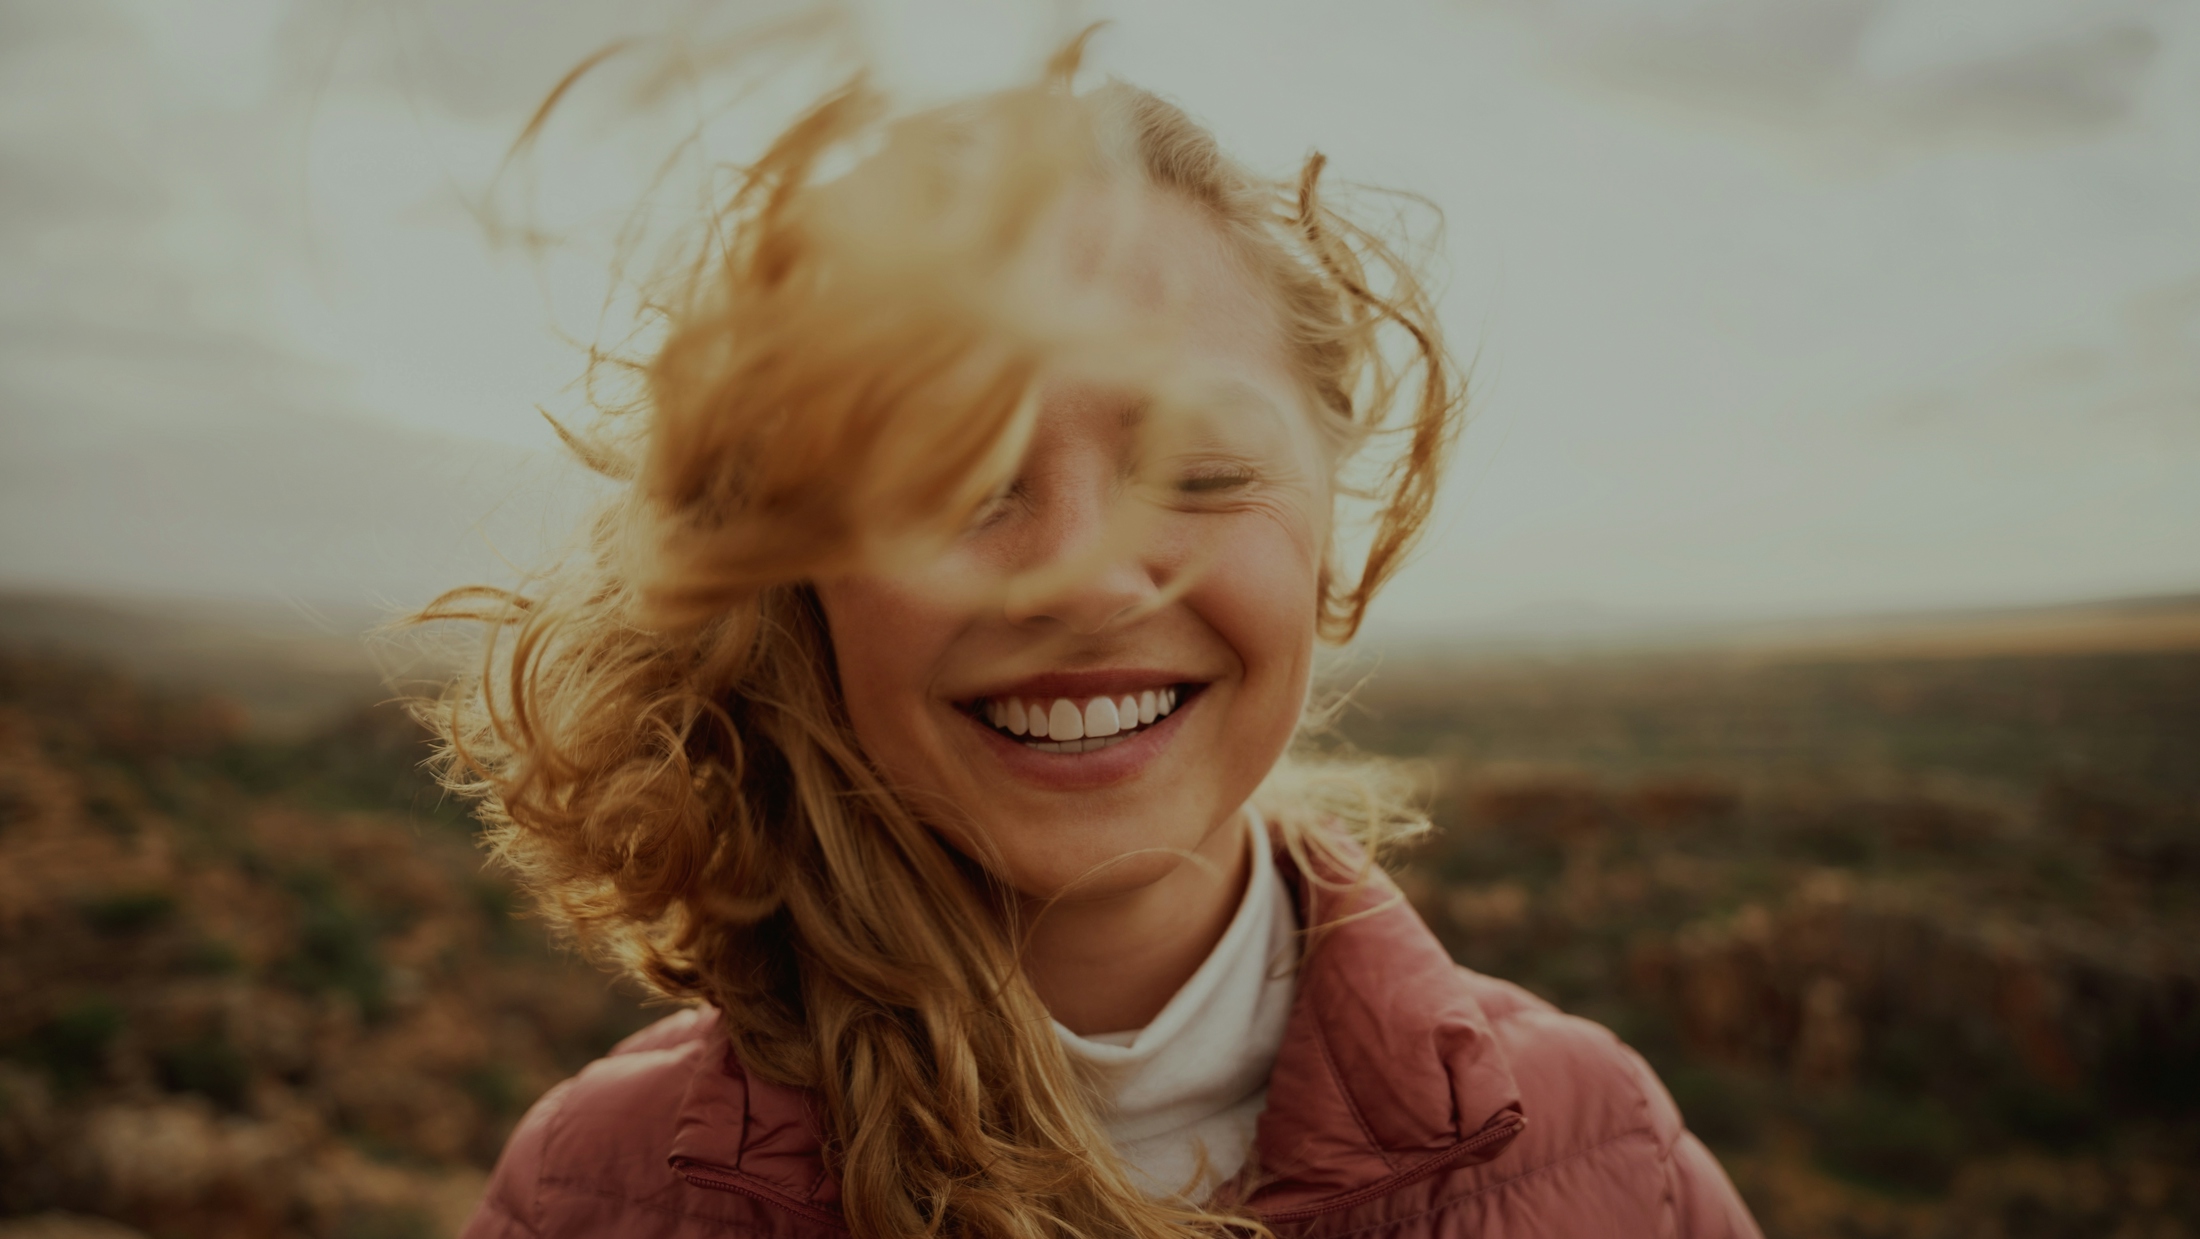 Girl smiling with the wind blowing her hair in her face